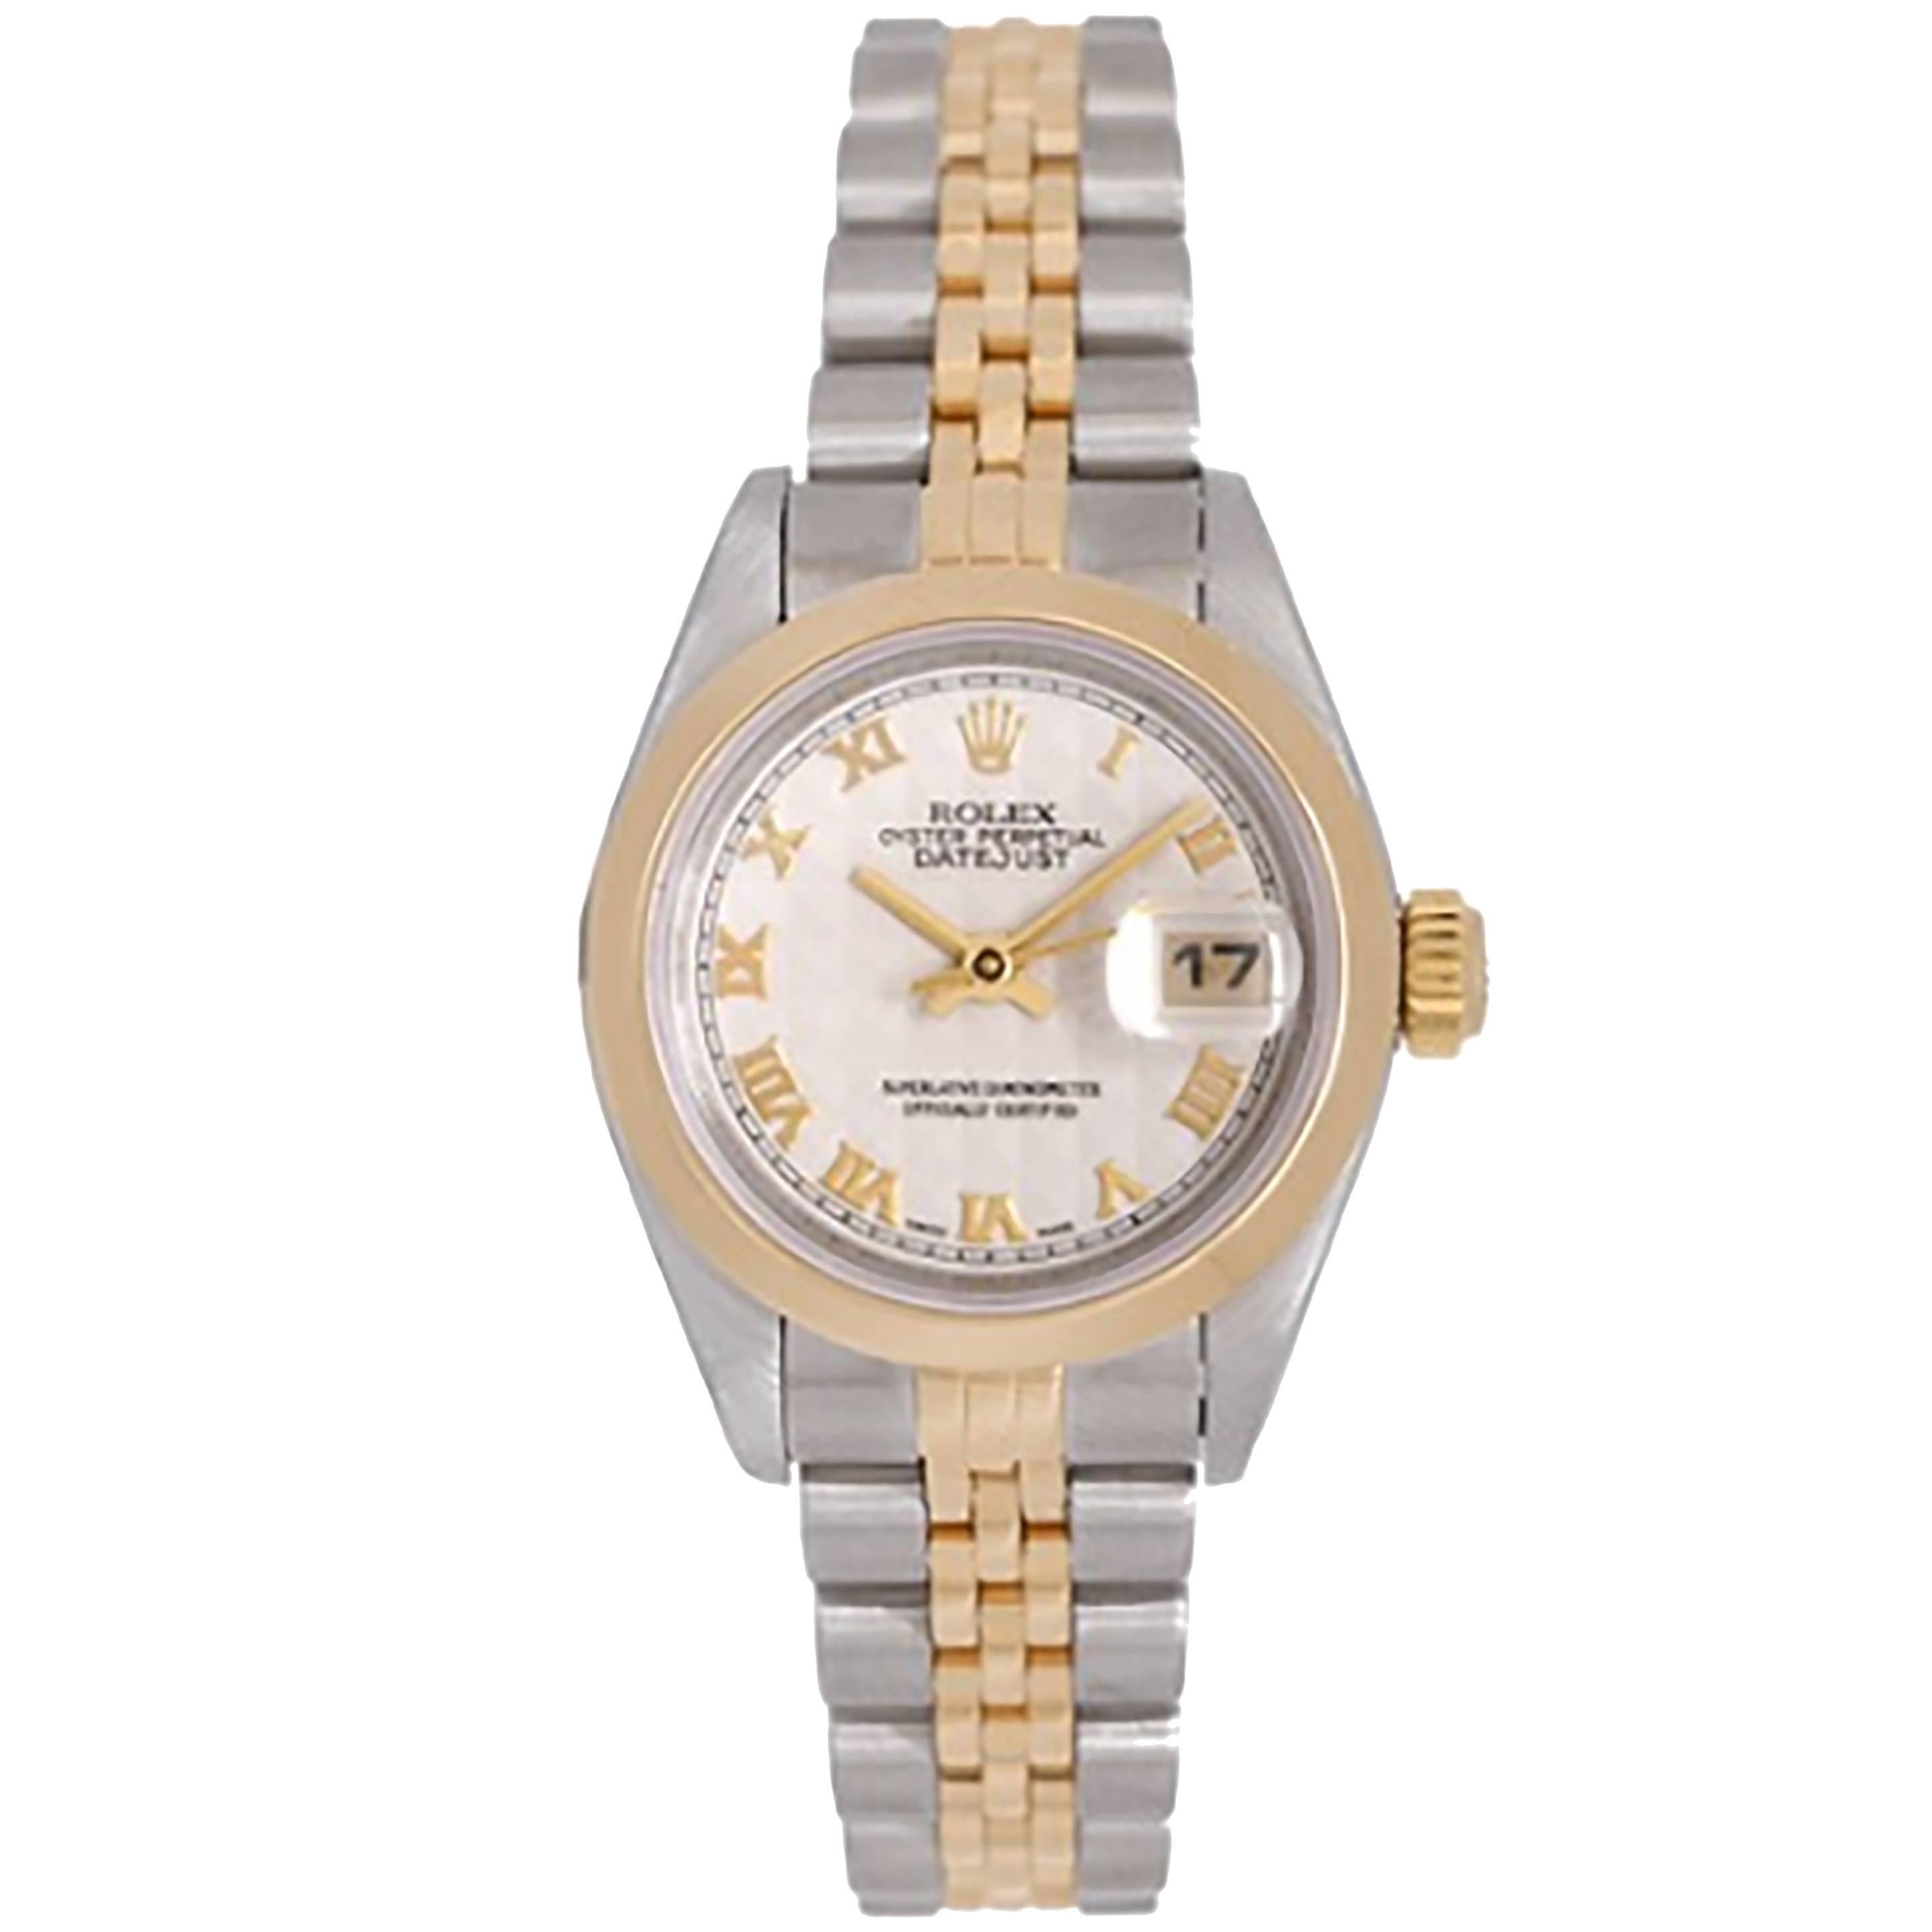 Rolex Ladies Yellow Gold Stainless Steel Datejust Automatic Winding Wristwatch